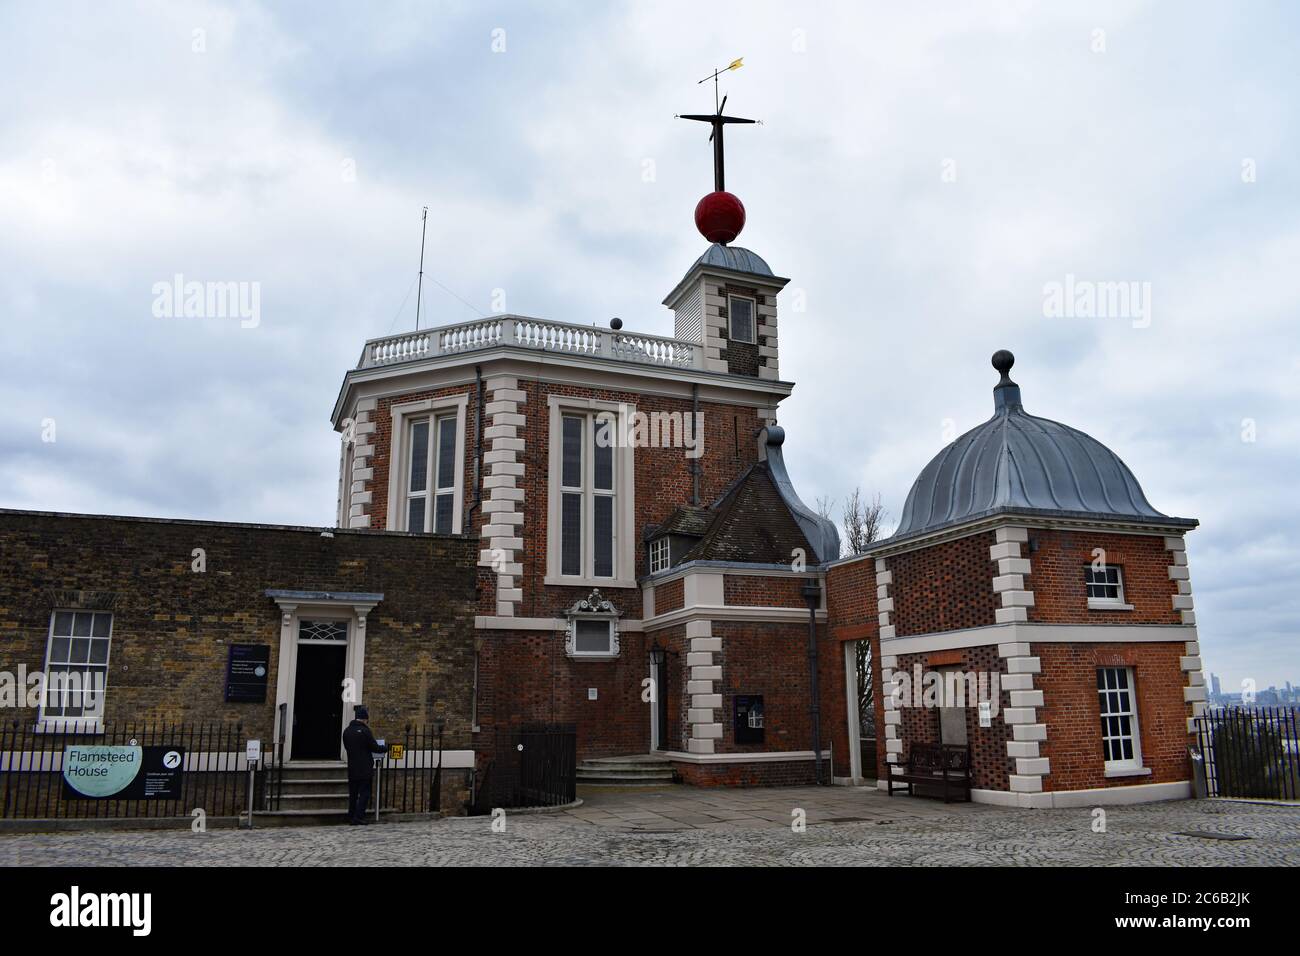 A visitor about to enter Flamsteed House at the Royal Observatory in Greenwich Park. A red time ball and weather vane above the Octagon Room. Stock Photo